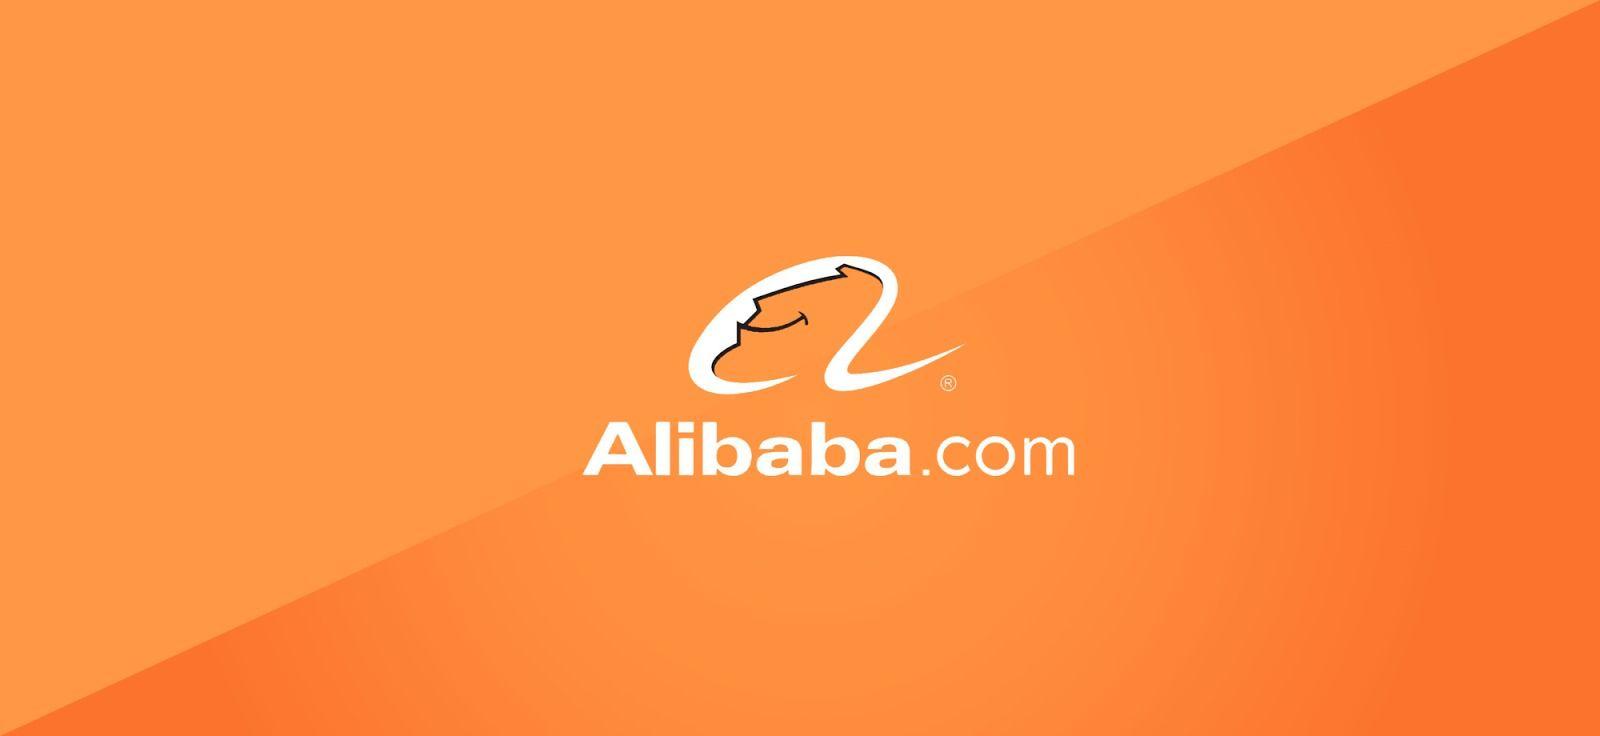 Alibaba.com Logo - Buying From Alibaba: Security, Sourcing, Shipping Costs & More [2019]